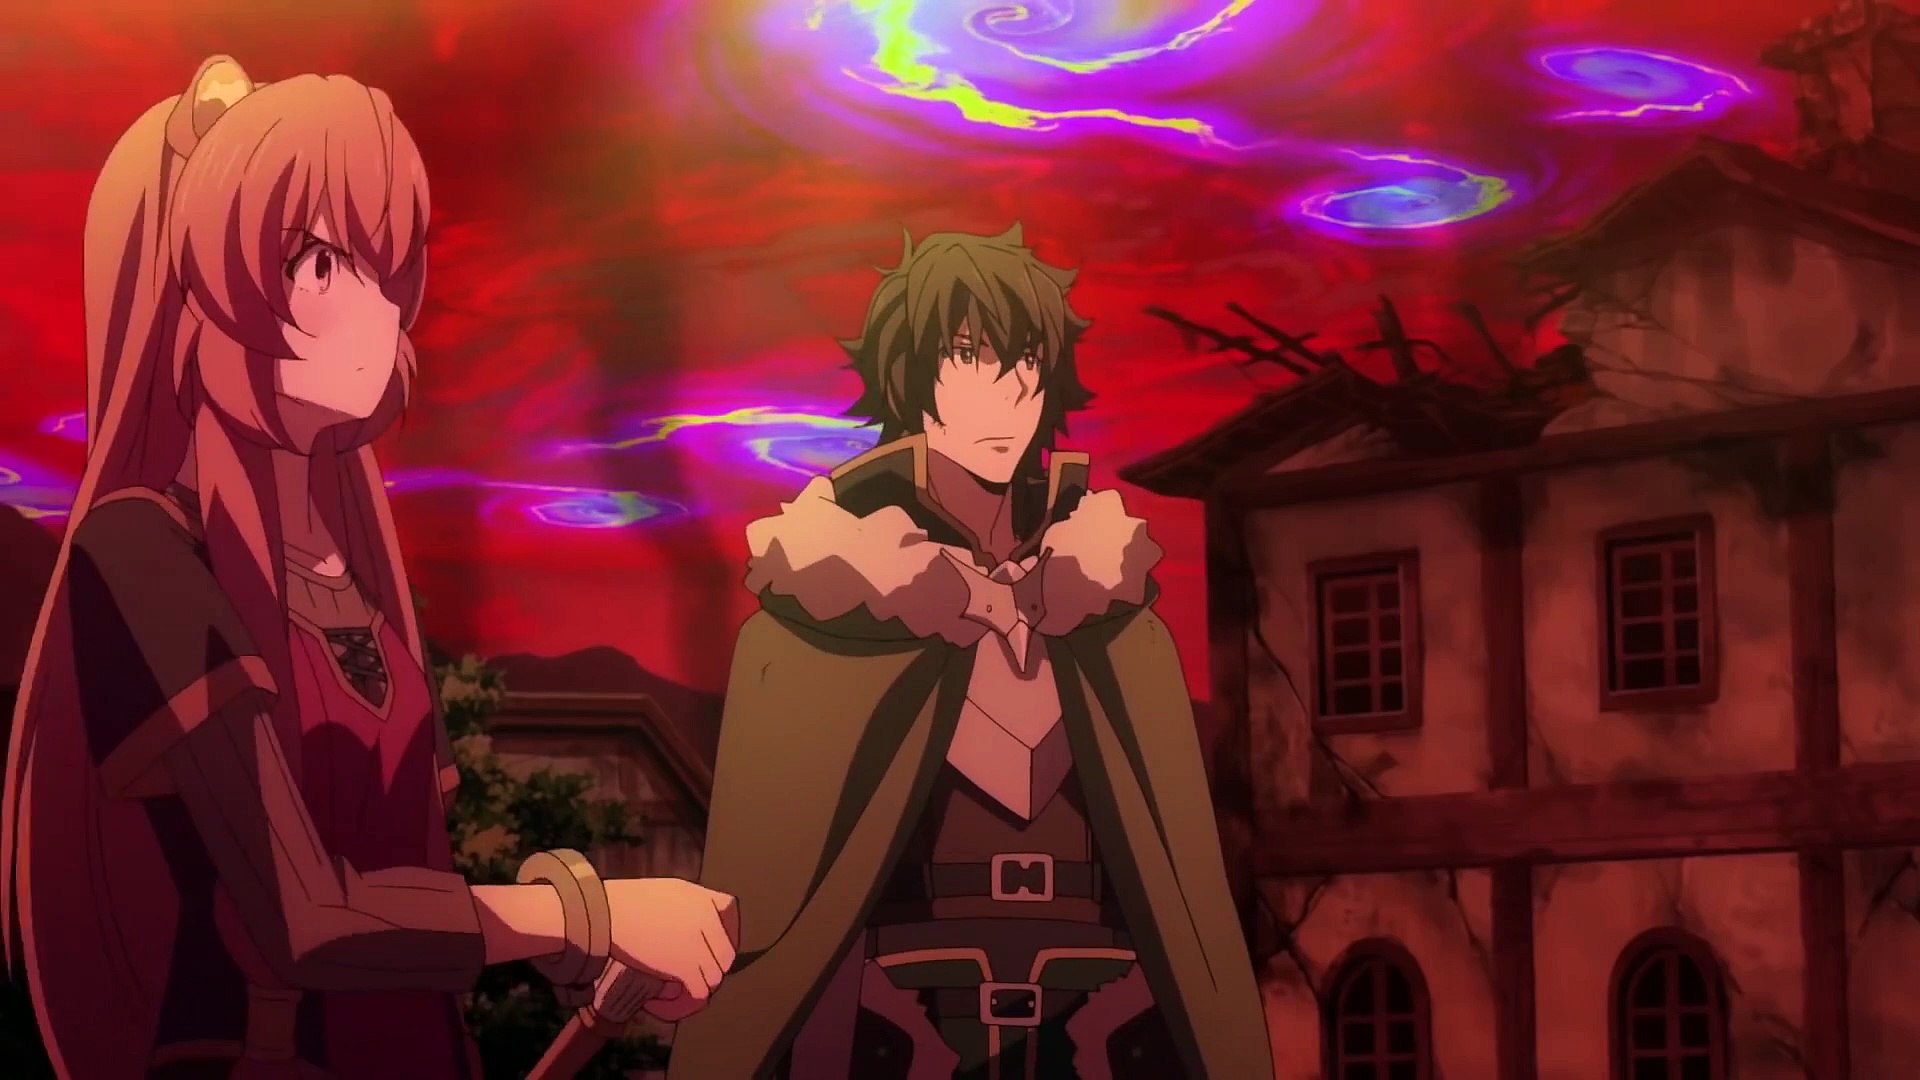 The rising of the shield hero trailer 2 (Subtitled) 